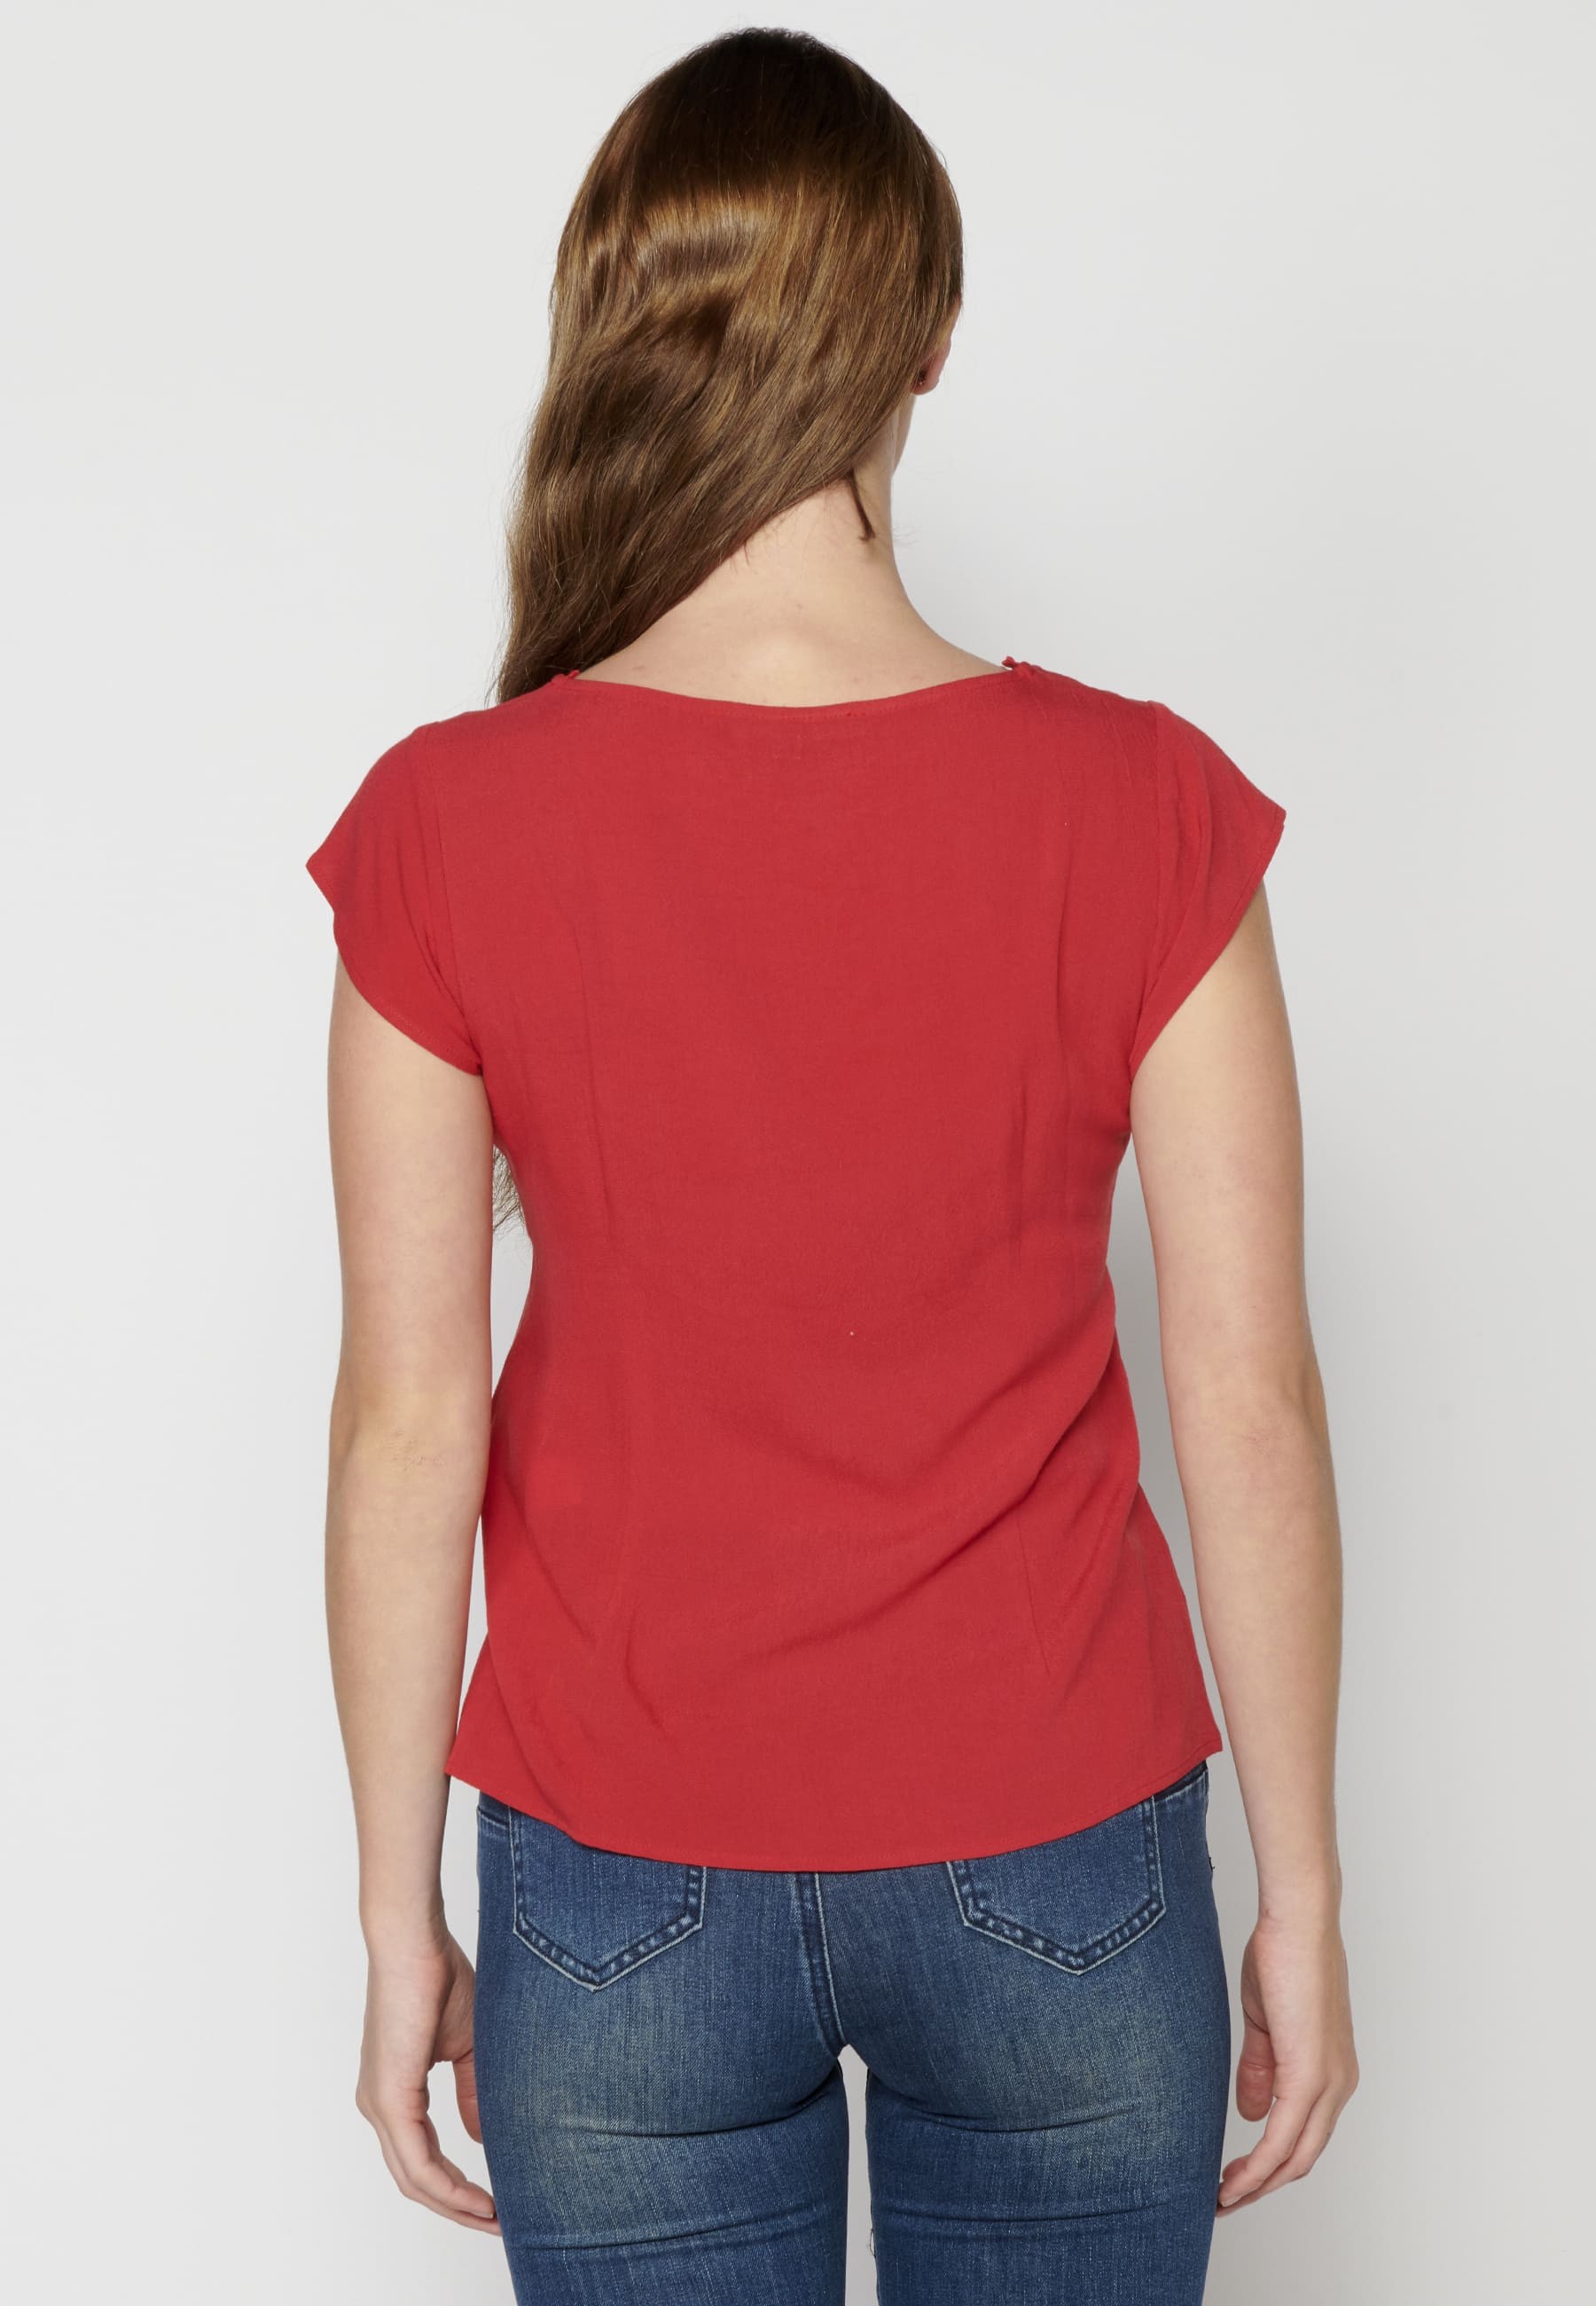 Short-sleeved blouse with floral details in Red Color for Women